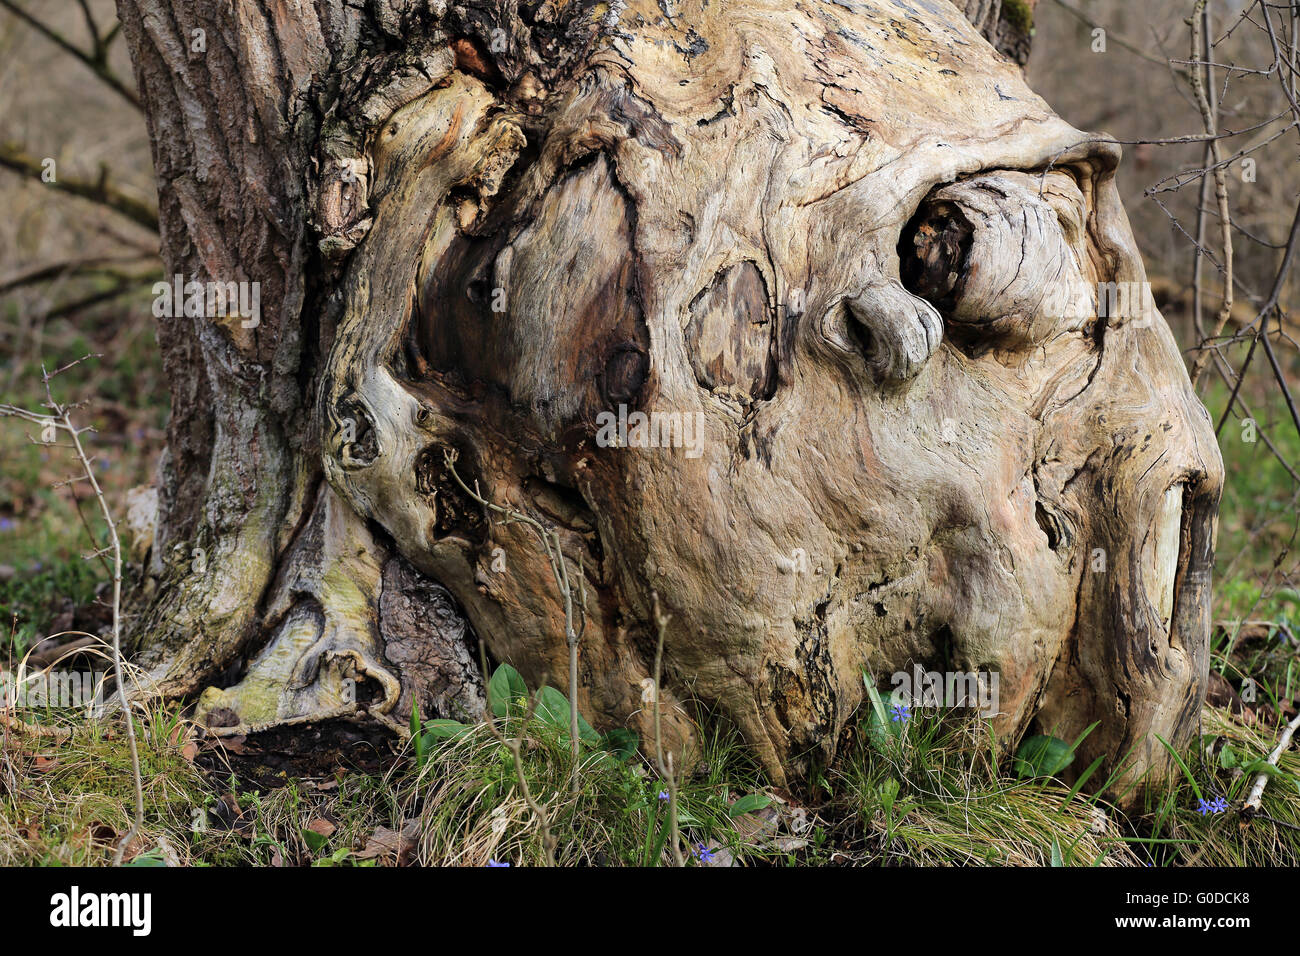 Tree simulating a mystical humanlike wooden face Stock Photo